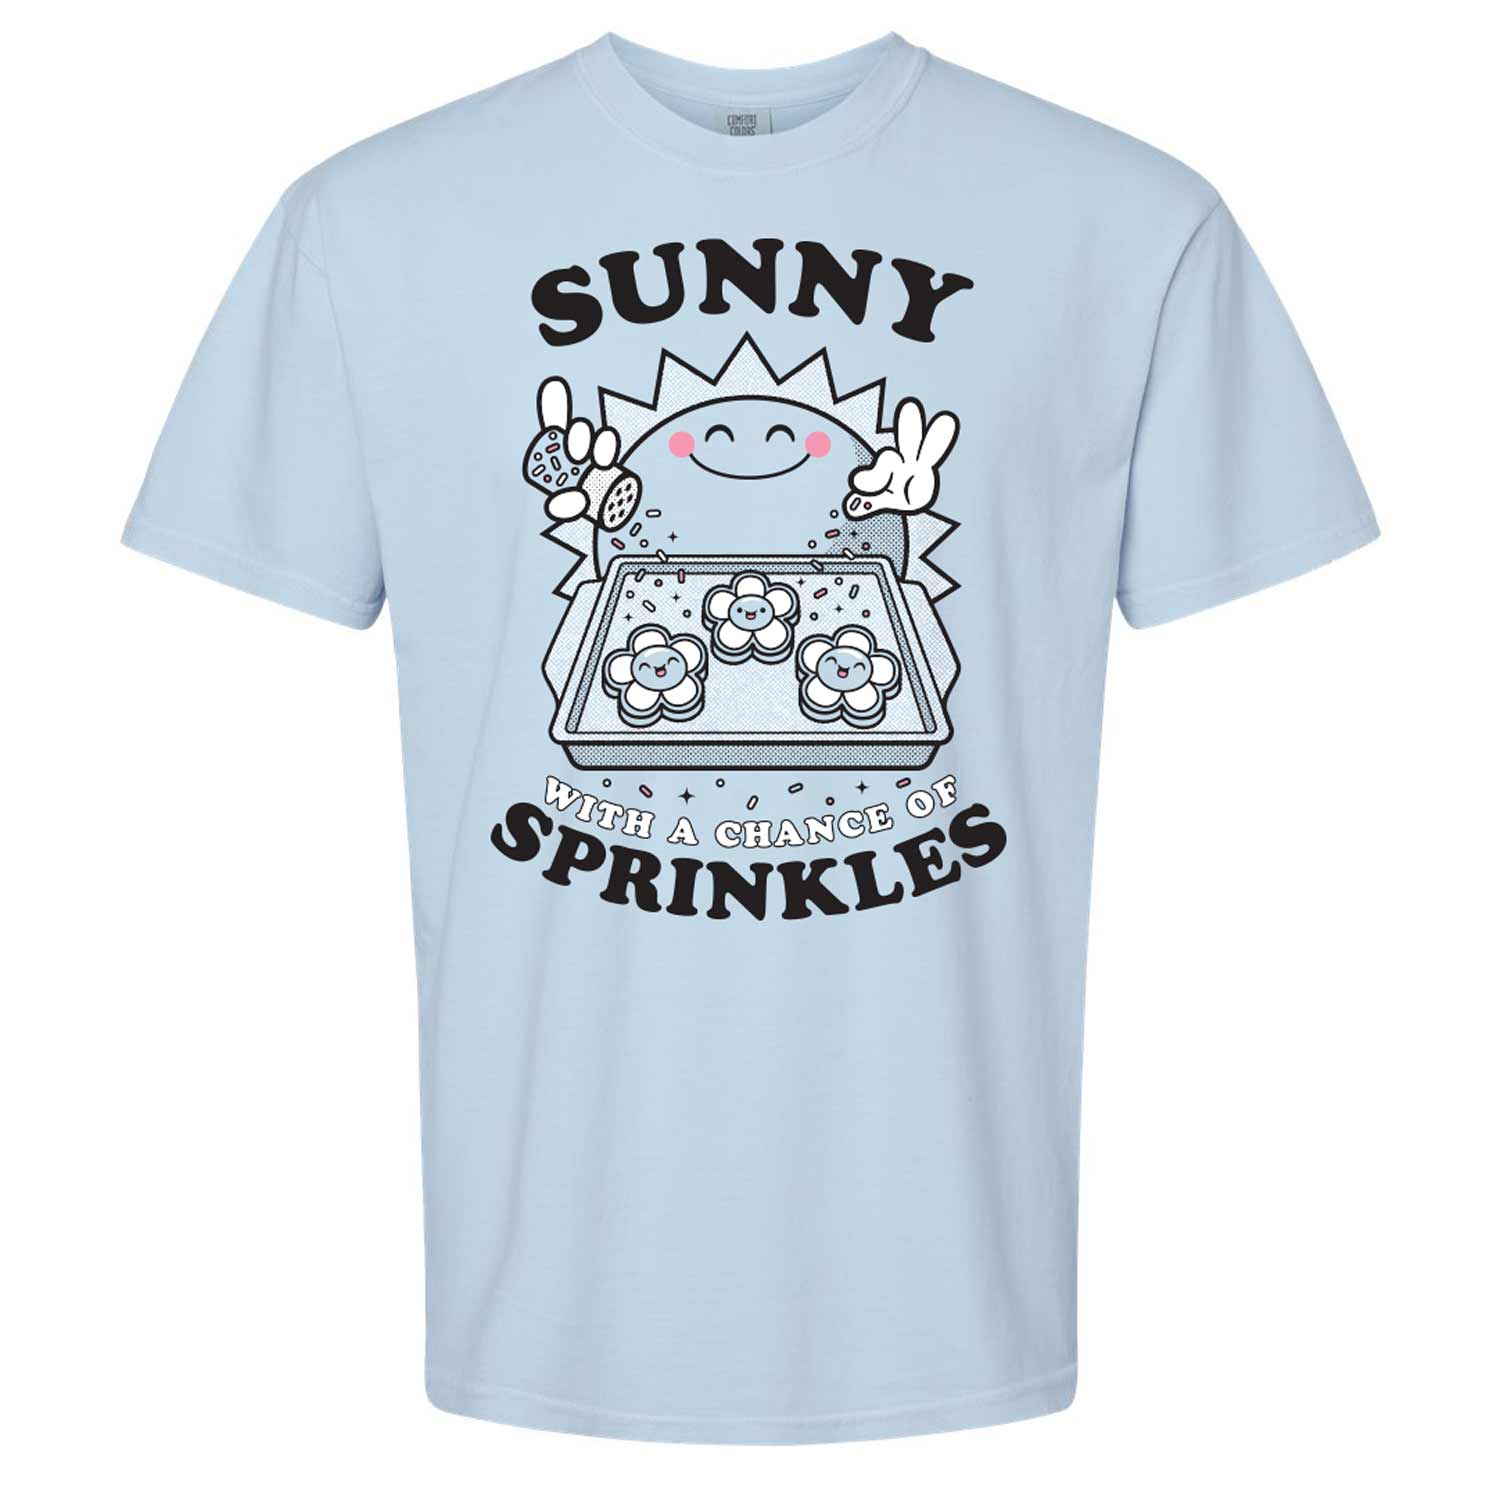 Sunny with a Chance of Sprinkles Unisex T-Shirt